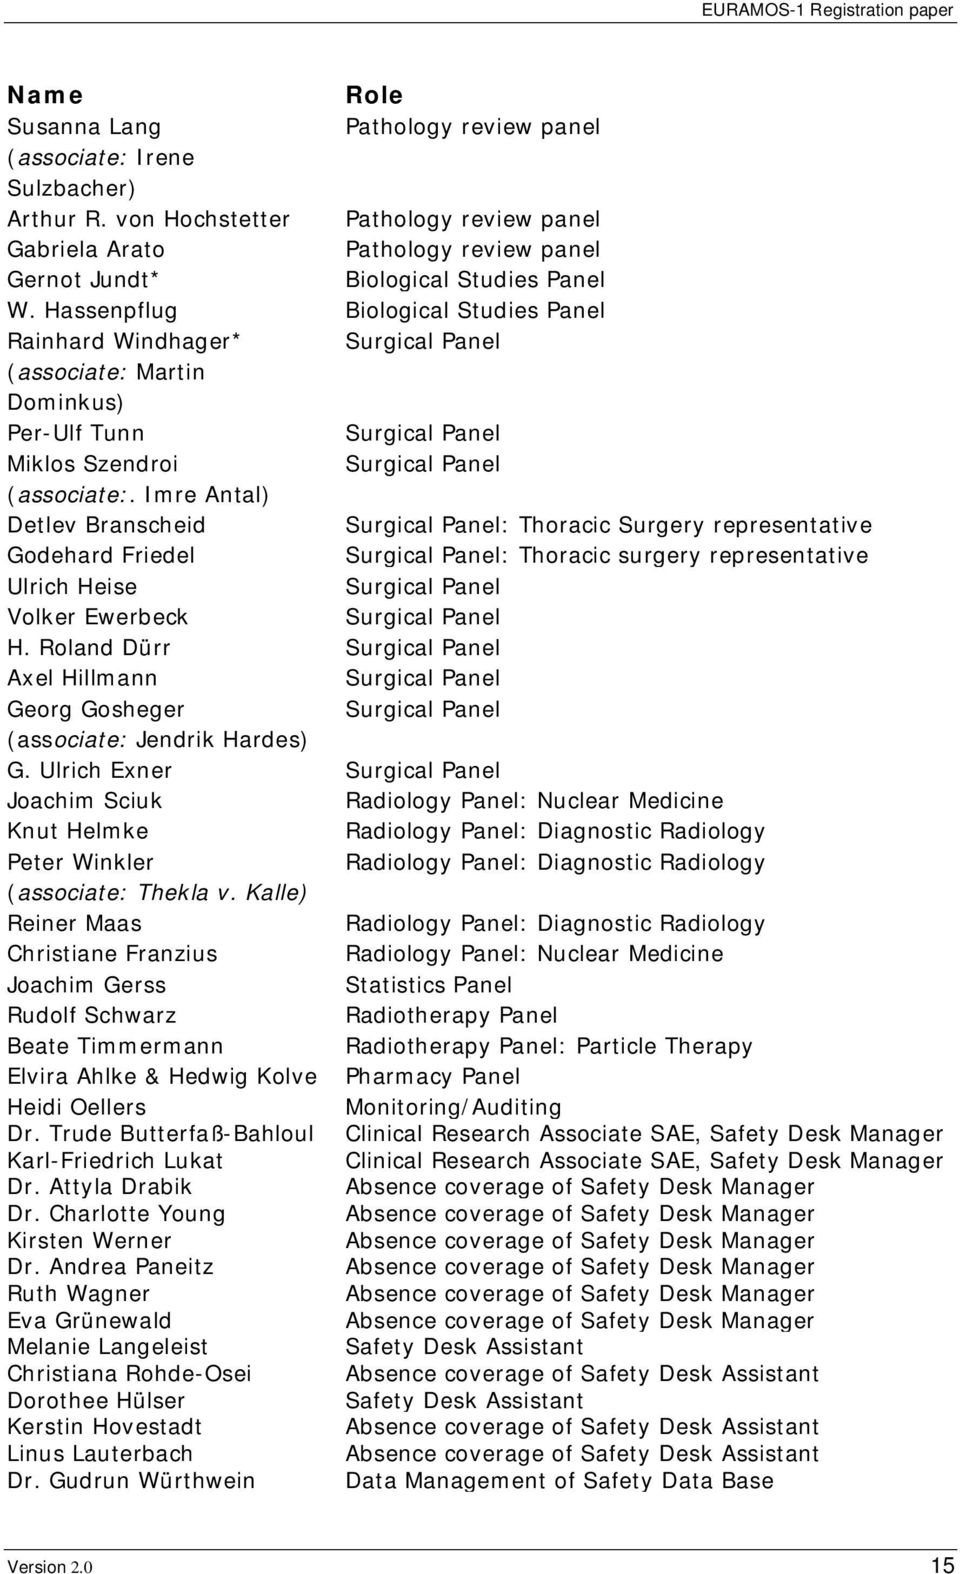 Imre Antal) Detlev Branscheid Surgical Panel: Thoracic Surgery representative Godehard Friedel Surgical Panel: Thoracic surgery representative Ulrich Heise Surgical Panel Volker Ewerbeck Surgical